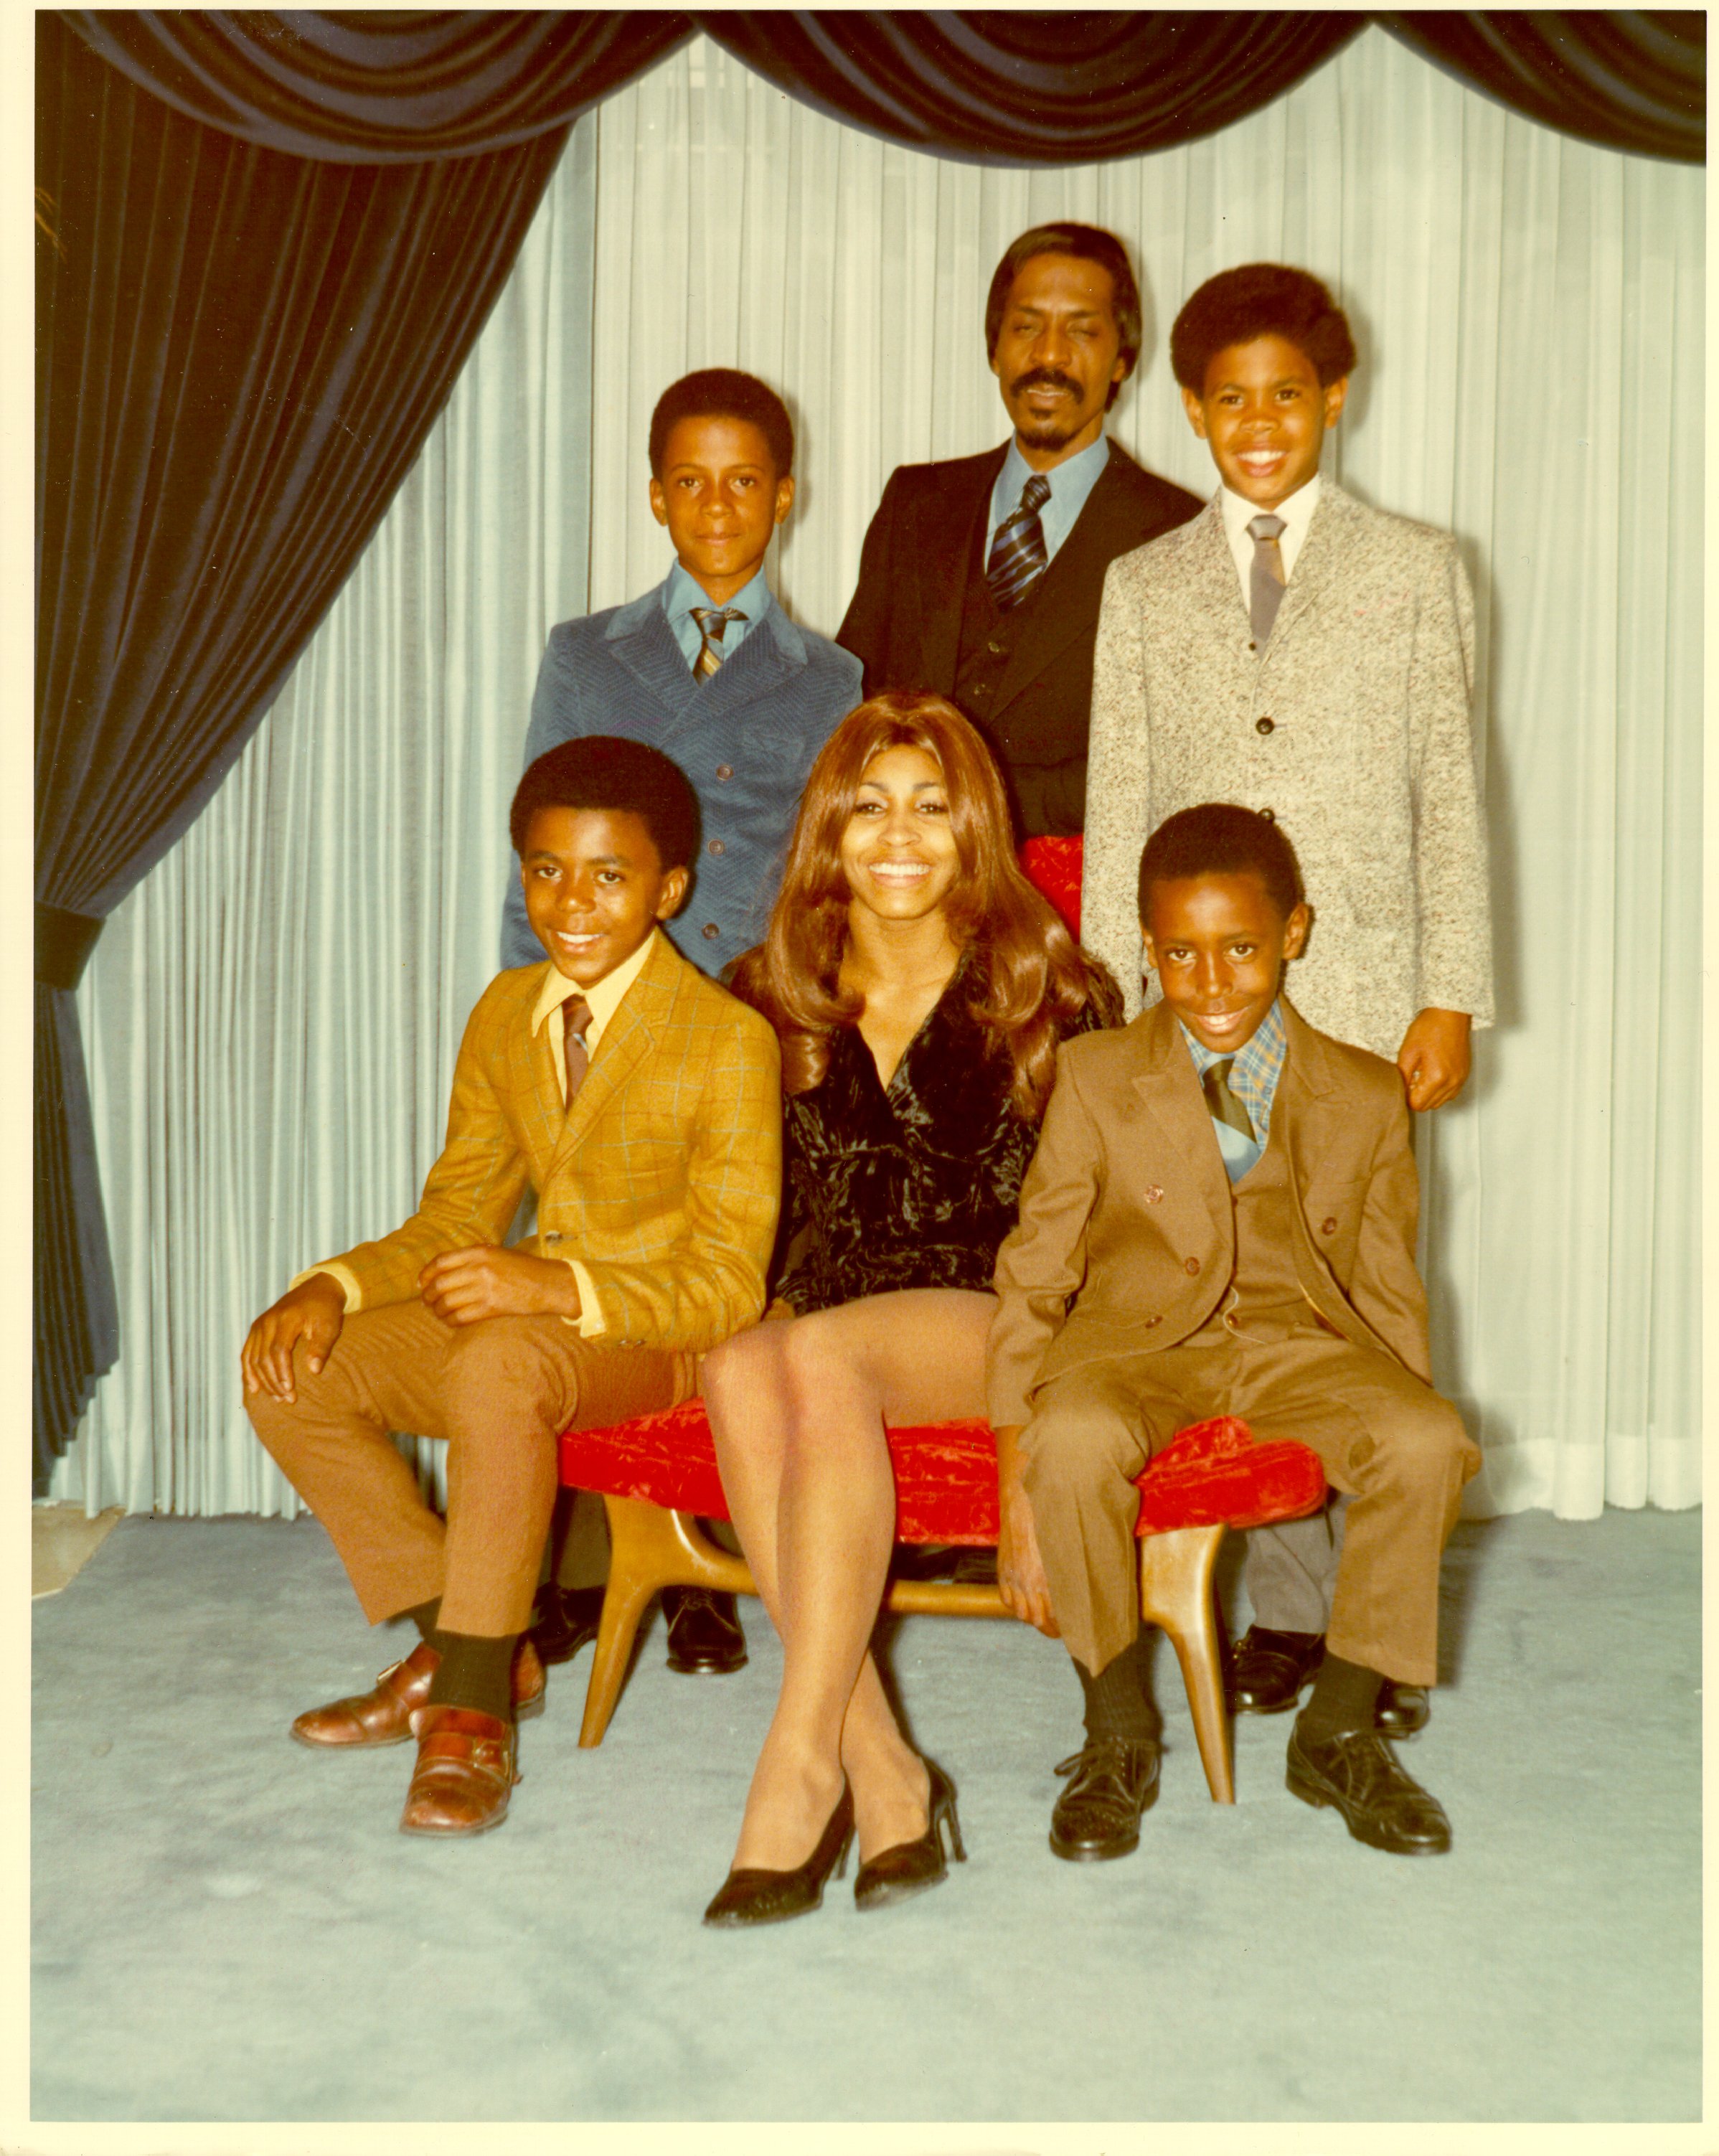 Ike and Tina Turner with their son and step-sons circa 1972, Michael Turner, Ike Turner, Jr. Craig Hill, and Ronnie Turner | Source: Getty Images